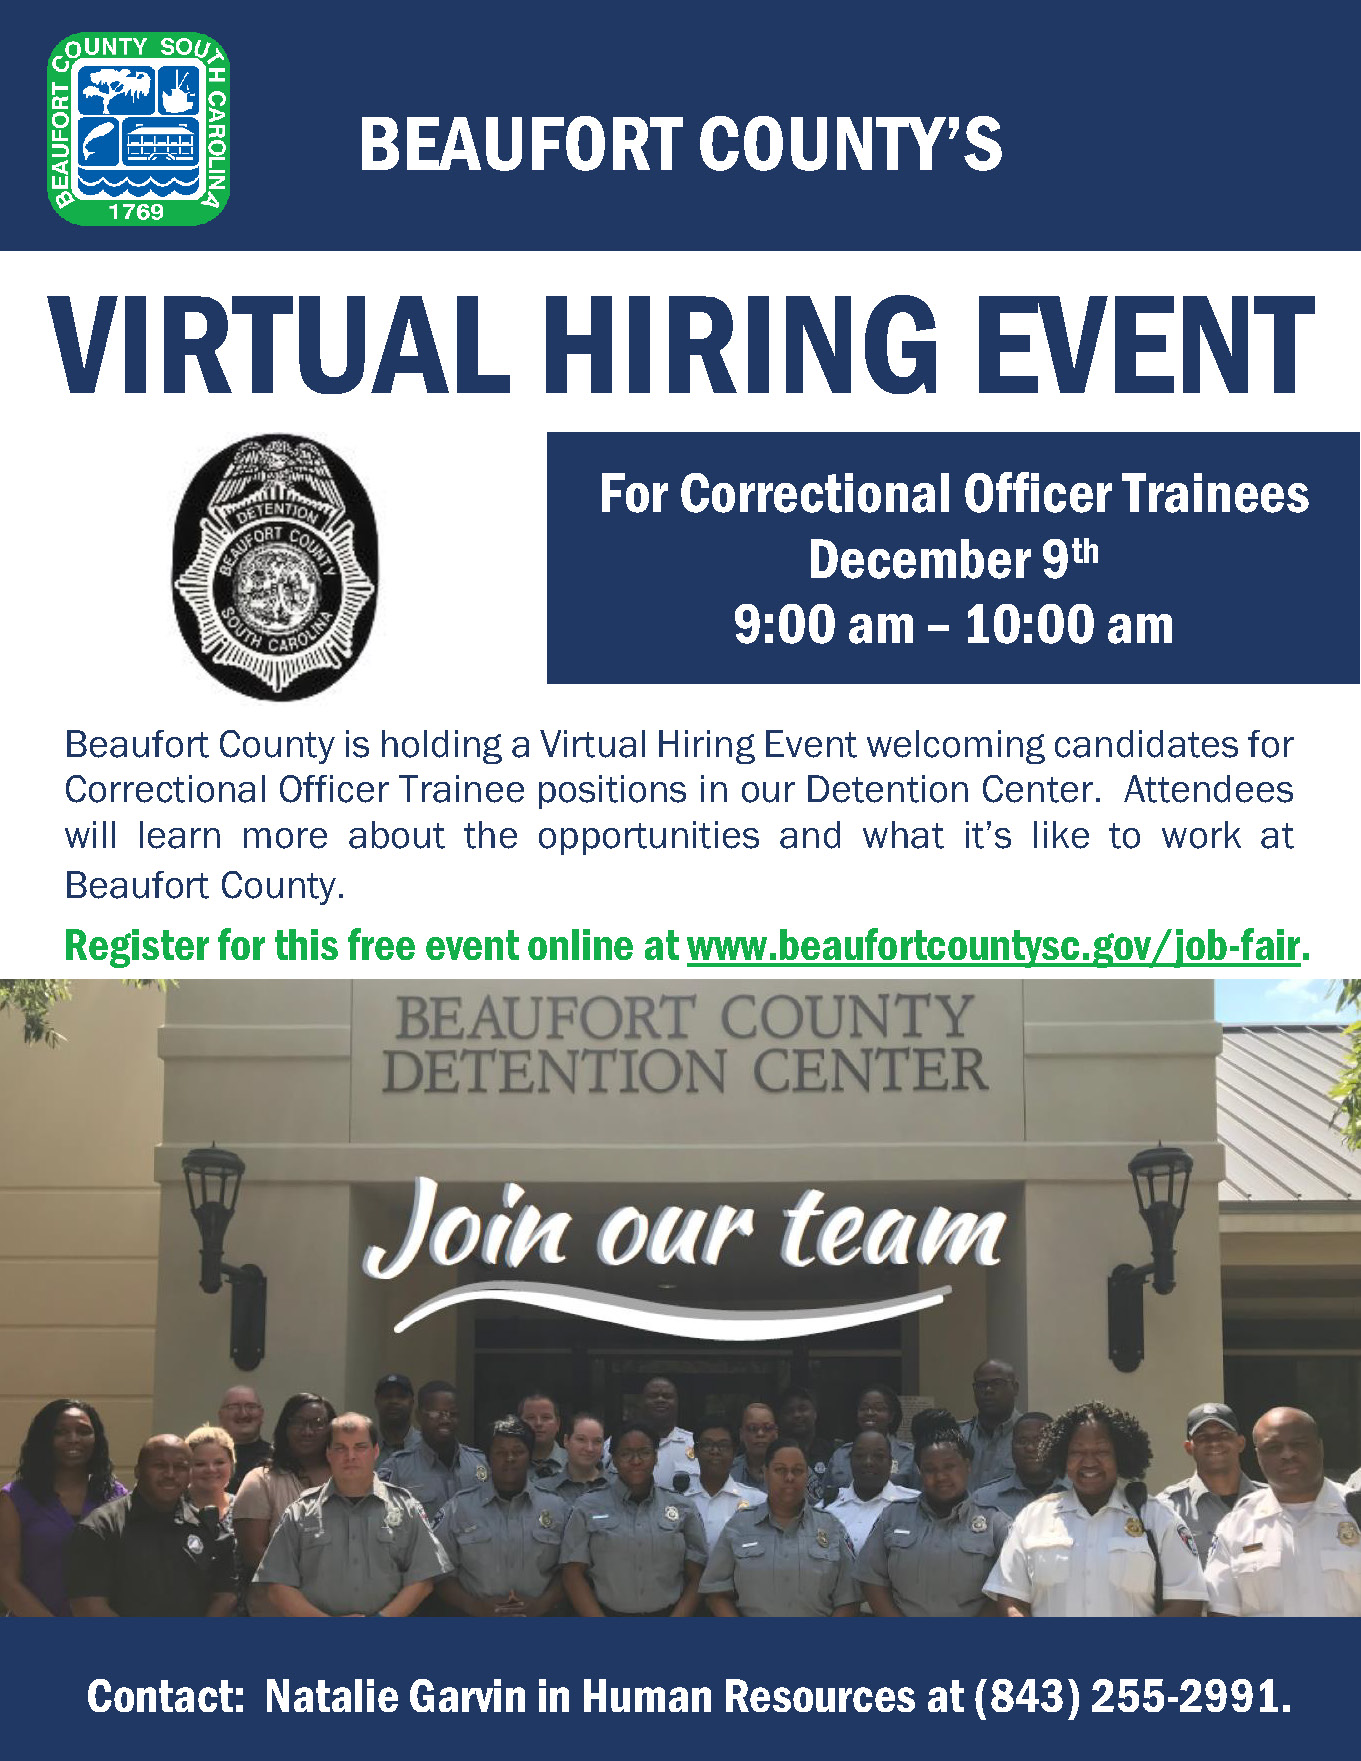 Beaufort County Holding Virtual Hiring Event for Correctional Officer Trainee Positions